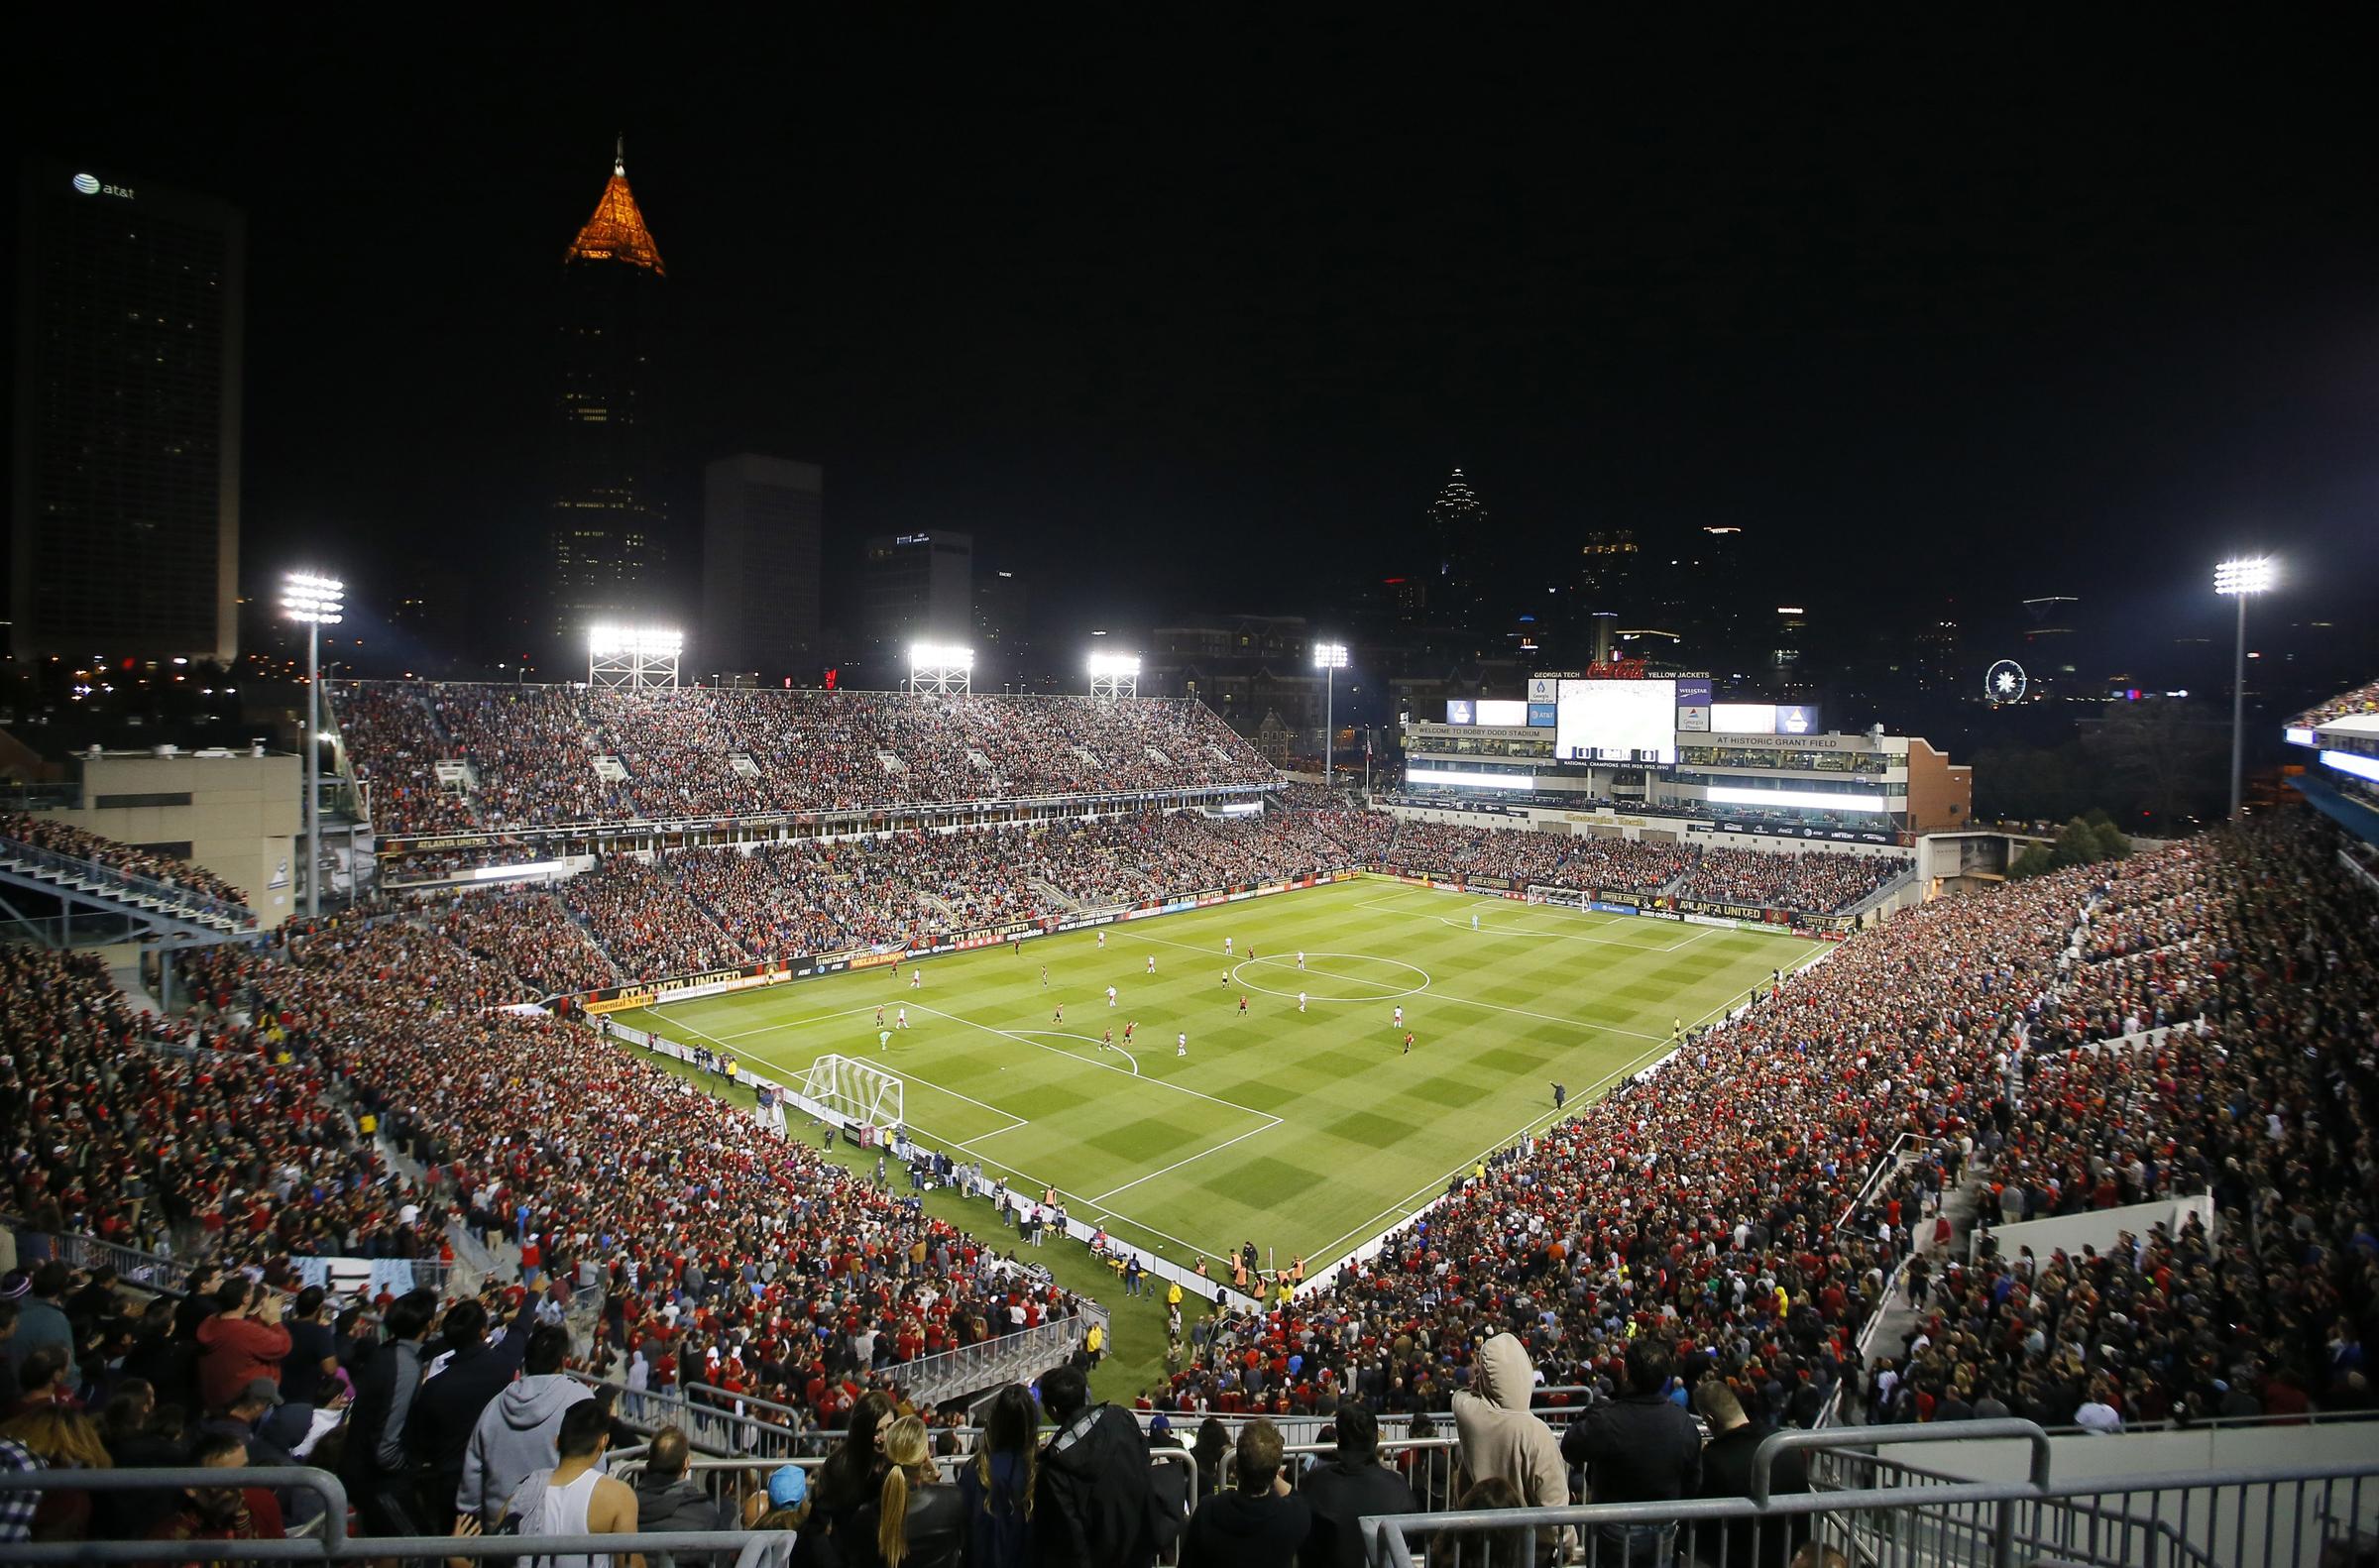 Bobby Dodd Stadium will play host to CD Chivas de Guadalajara and Club América,  in their Súper Clásico series. This rivalry game has been happening since 1943, is recognized a one of the premier international matchups.